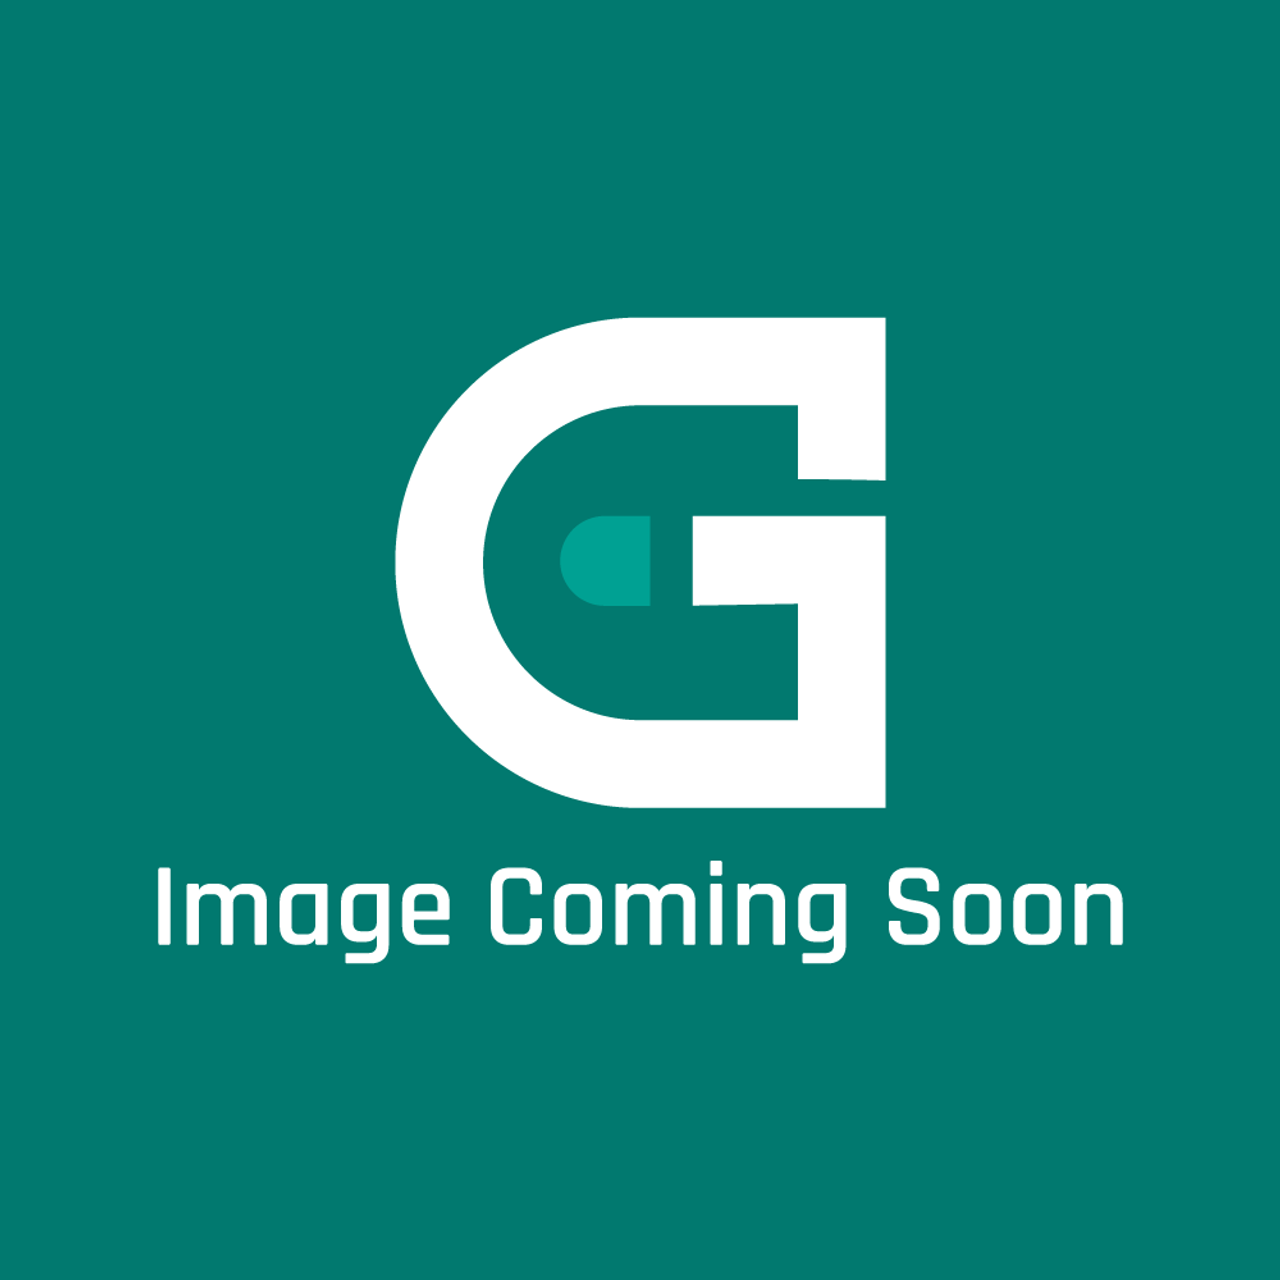 Garland 4518246 - Griddle Assy 24In - Image Coming Soon!